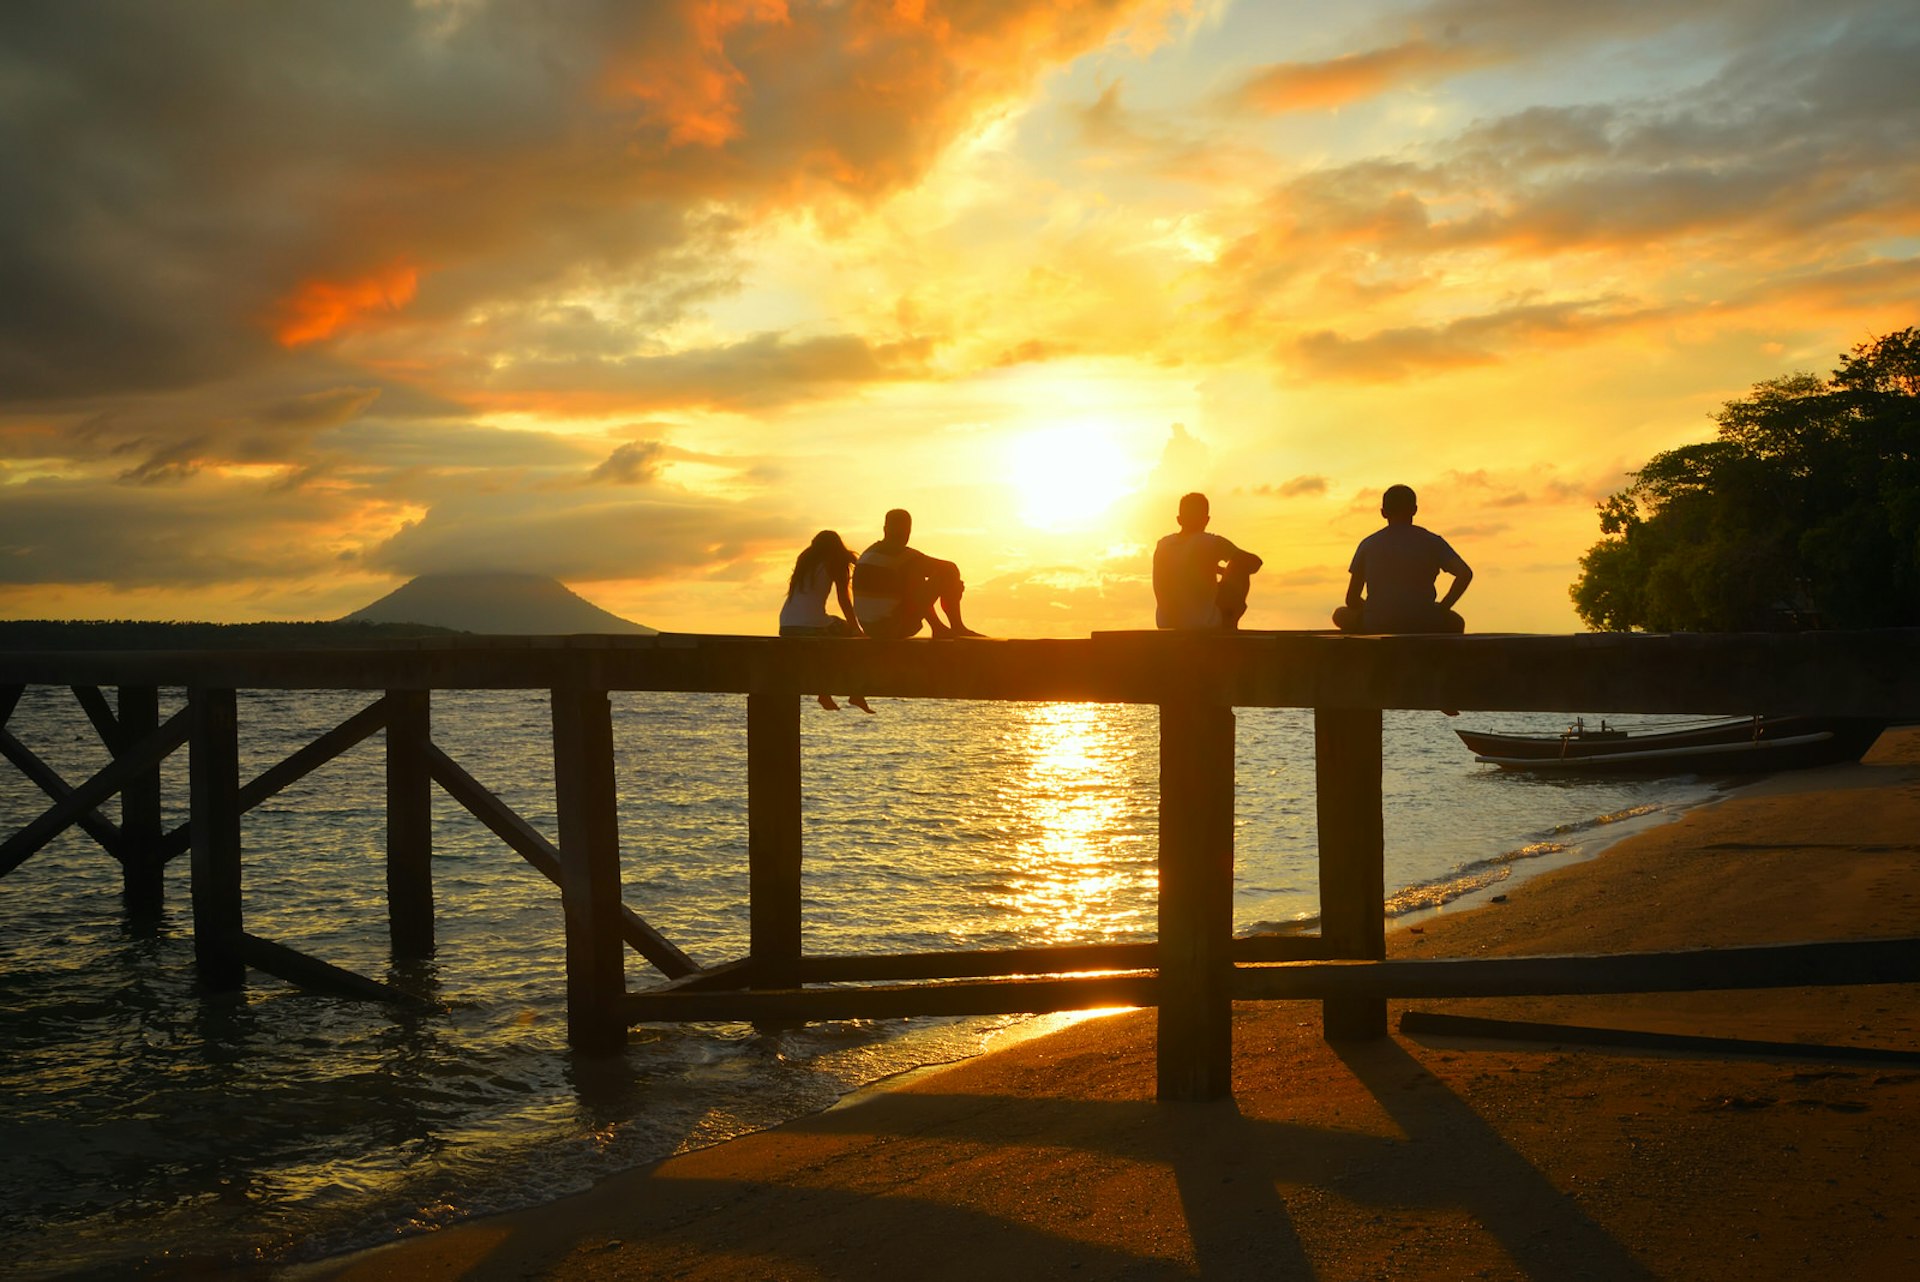 A group of travellers sit on a pier at sunset © soft_light / Shutterstock